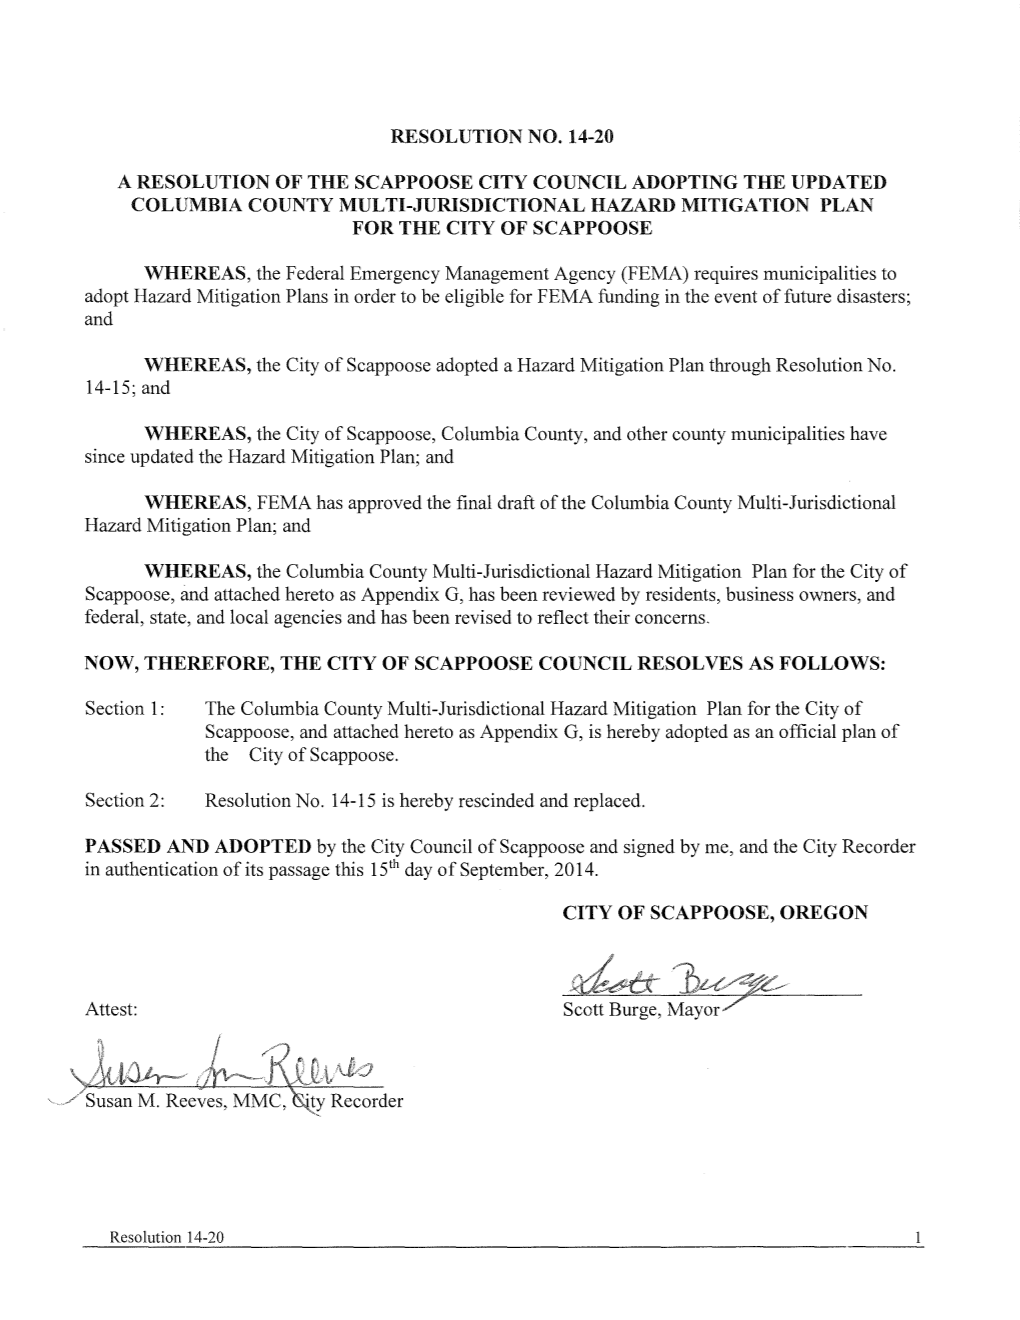 Resolution No. 14-20 a Resolution of the Scappoose City Council Adopting the Updated Columbia County Multi-Jurisdictional Hazard